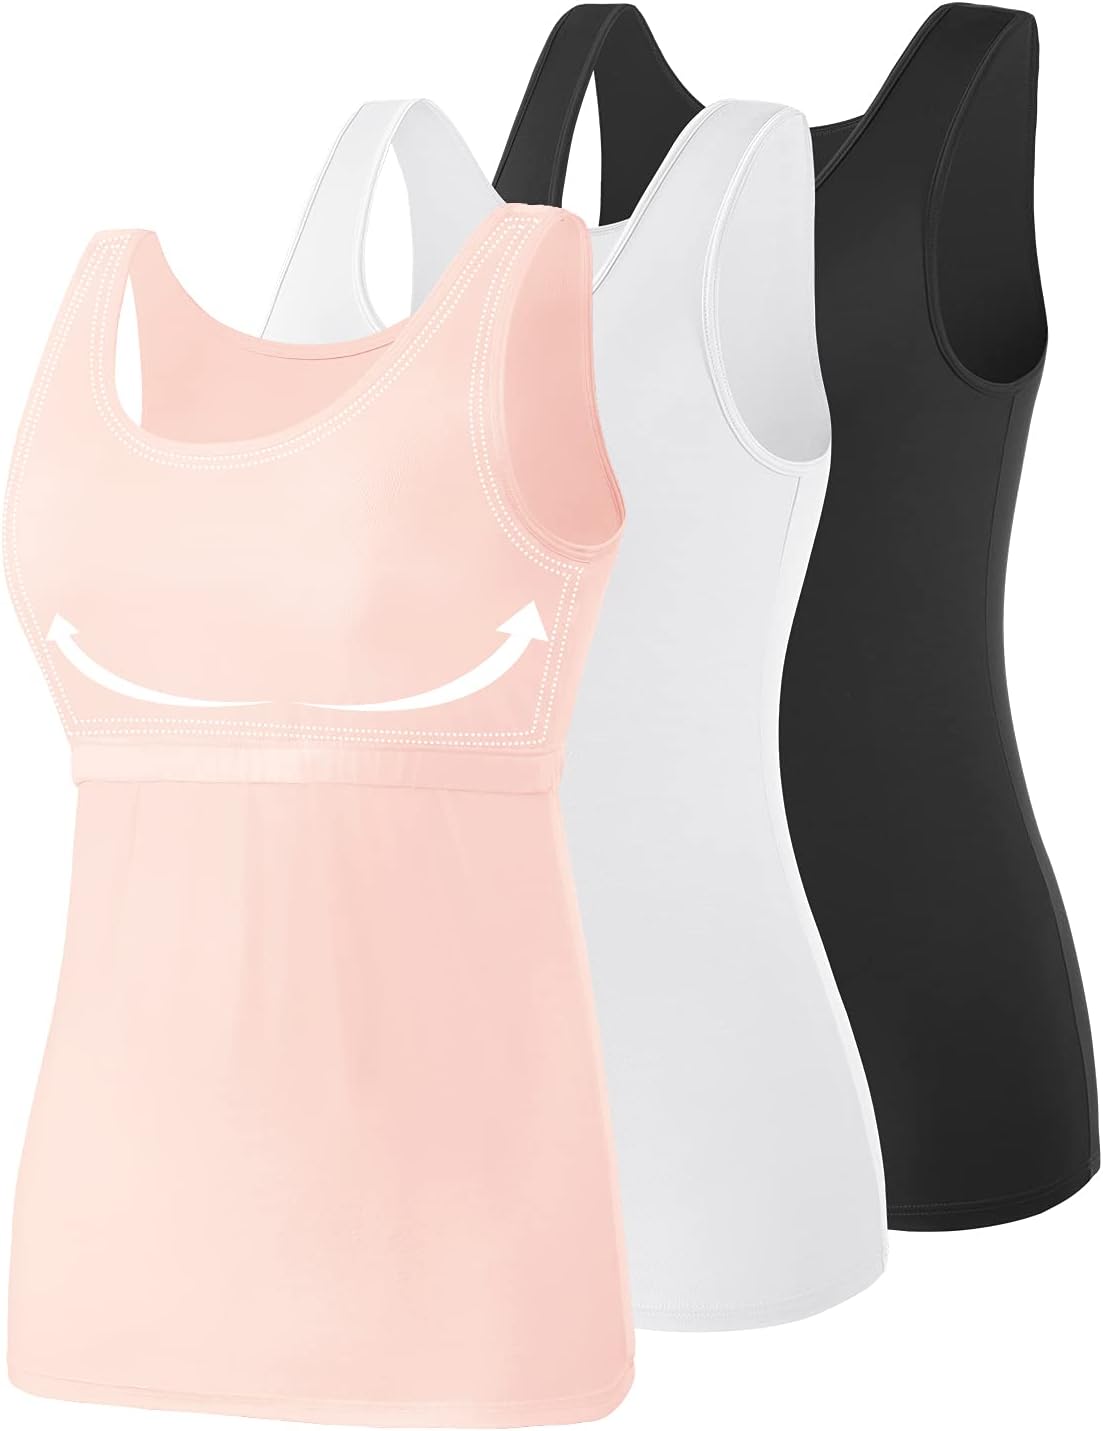 Layering Cotton Camisole with Shelf Bra - 3 Pack